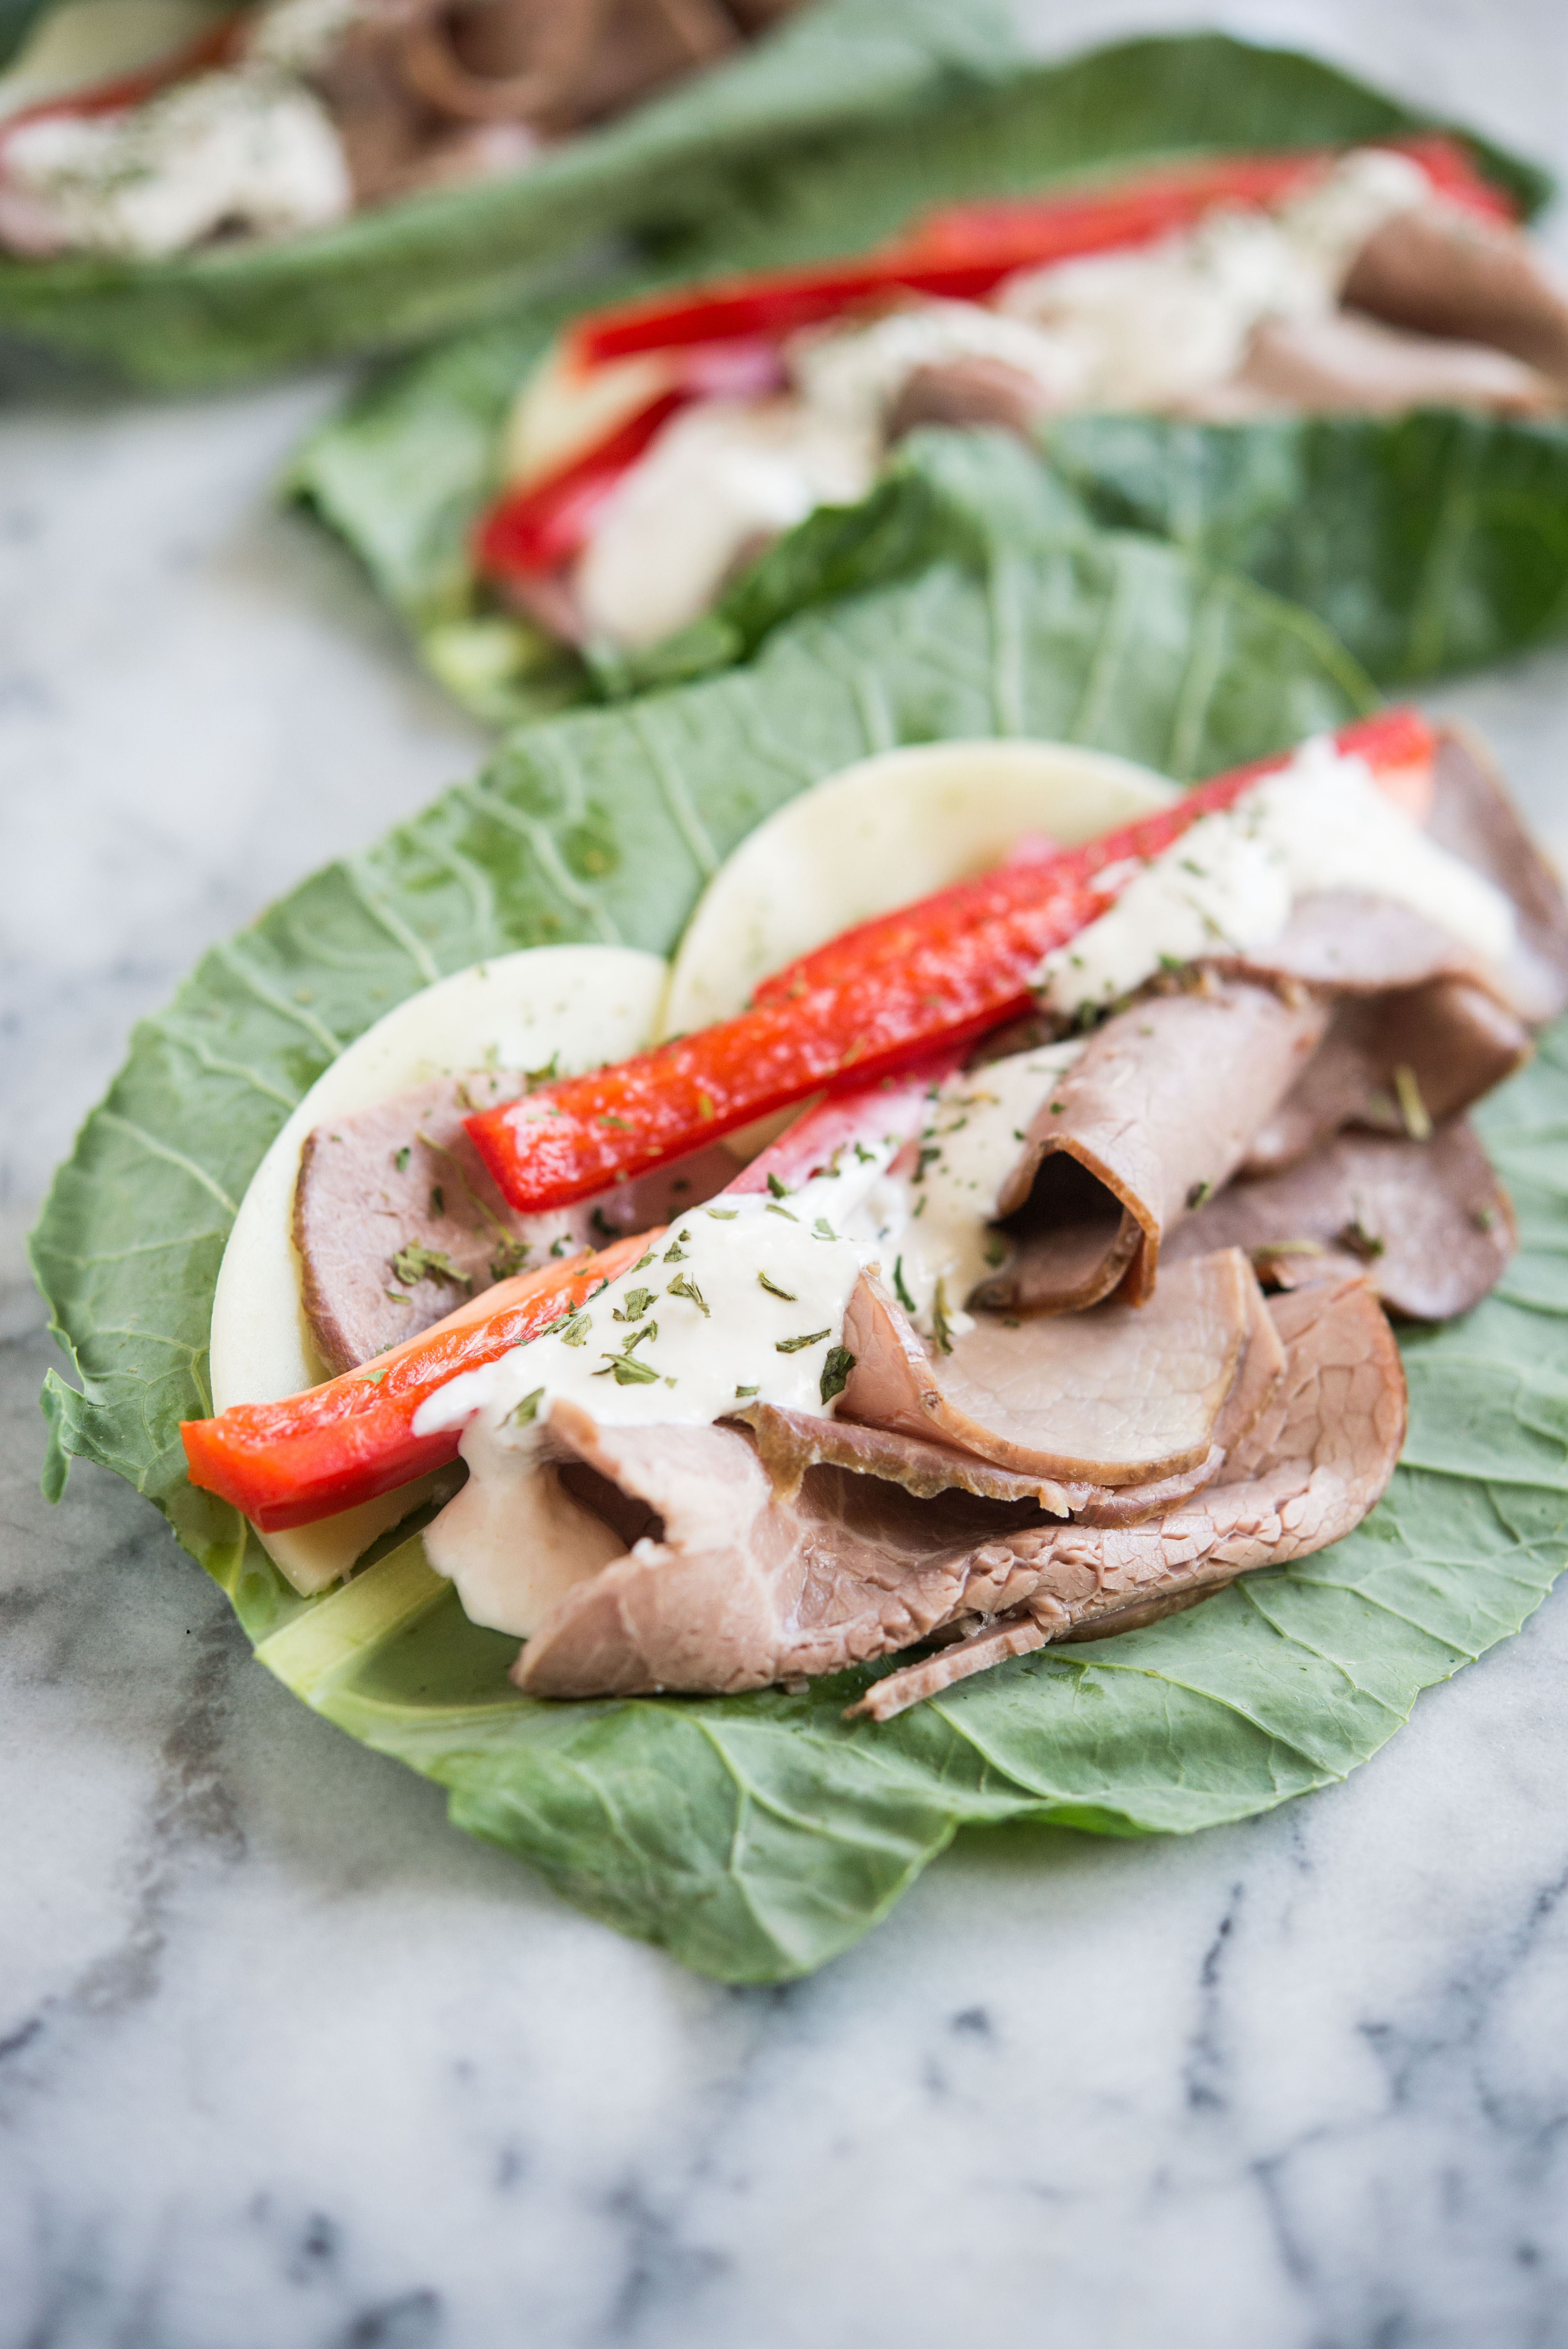 low carb roast beef wraps - collard green leaves layered with provolone cheese, roast beef, red bell peppers, and horseradish sauce sitting on a marble board